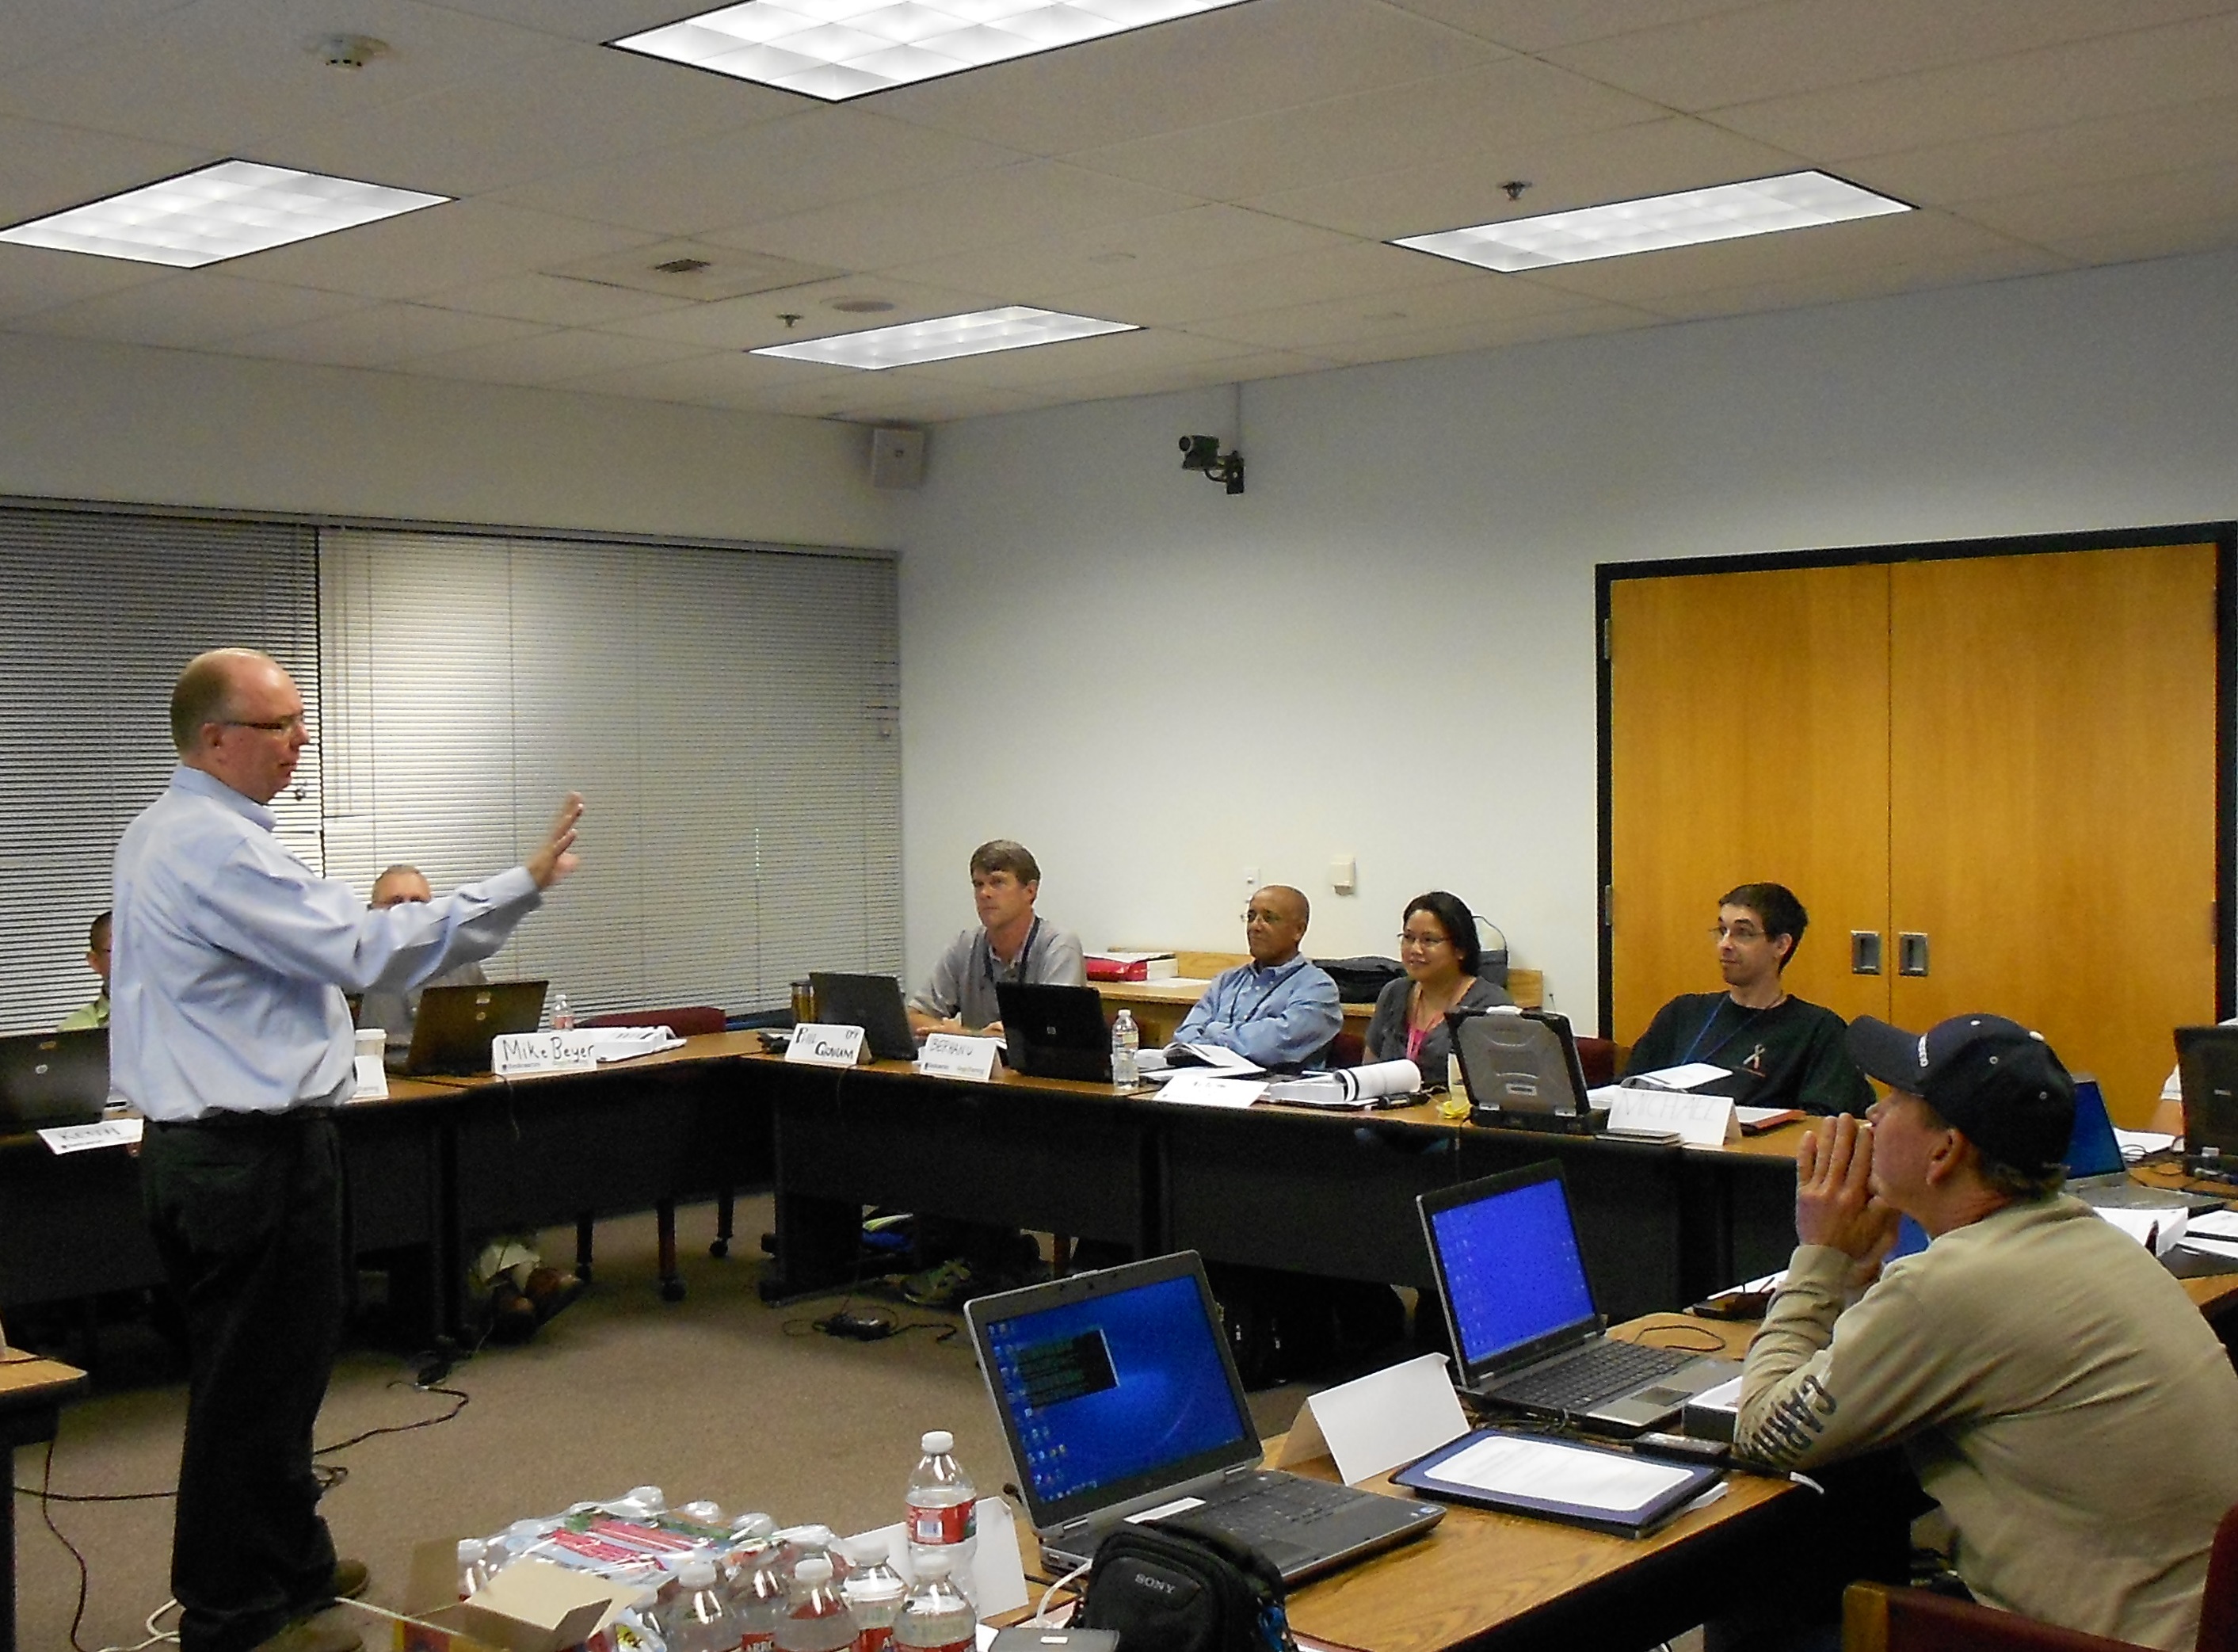 Instructor Andrew Walding responds to a question from a student during the IP Fundamentals course.